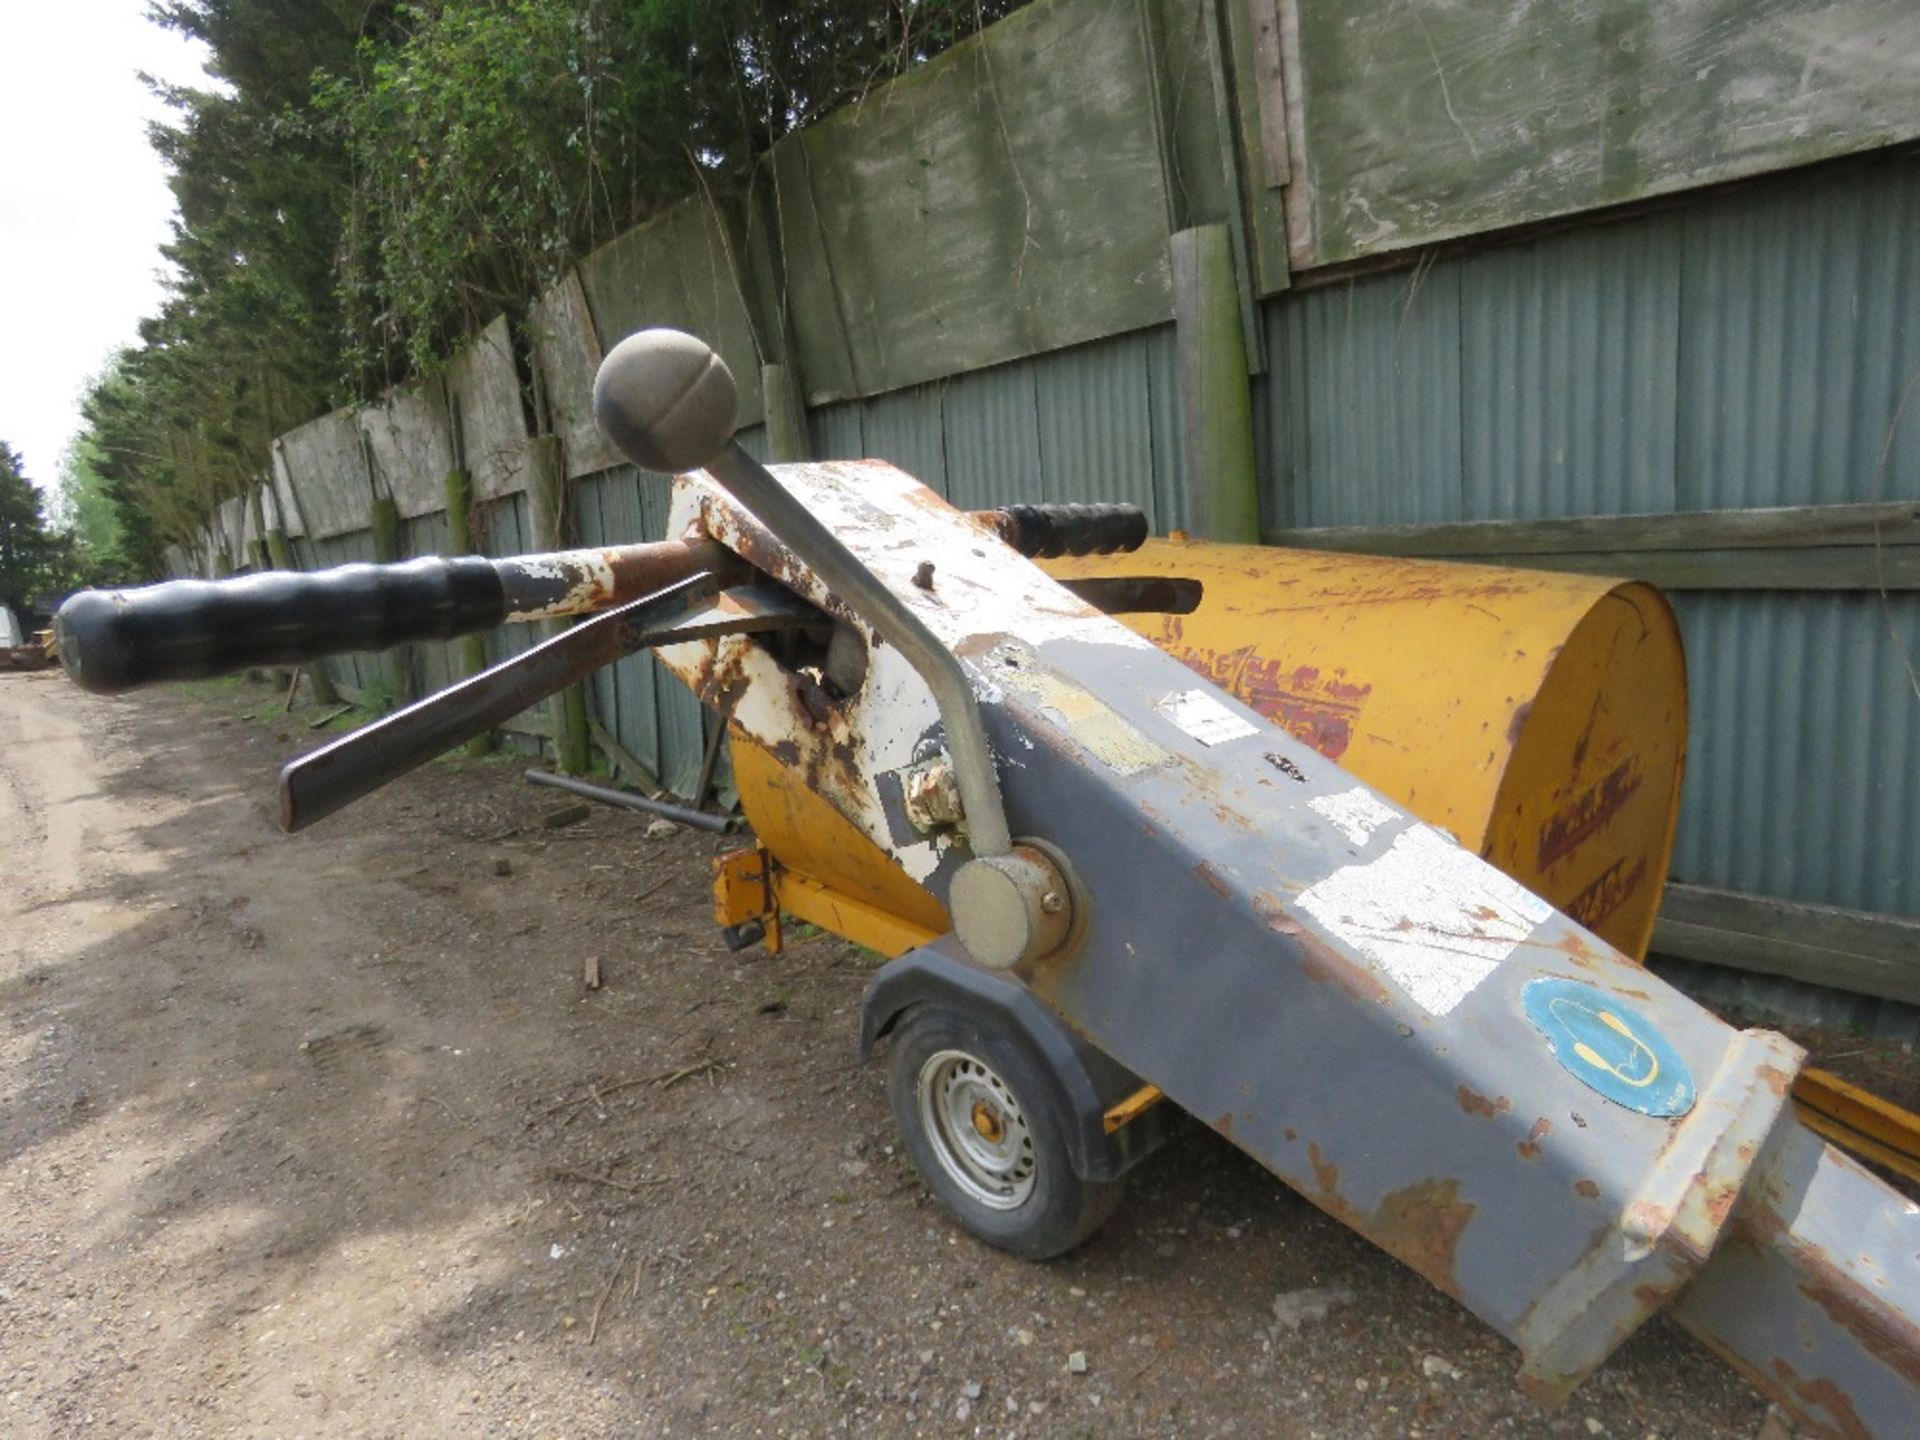 TEREX BENFORD SINGLE DRUM ROLLER ON TRAILER. WHEN TESTED WAS SEEN TO RUN, DRIVE AND VIBRATE...SEE VI - Image 9 of 9